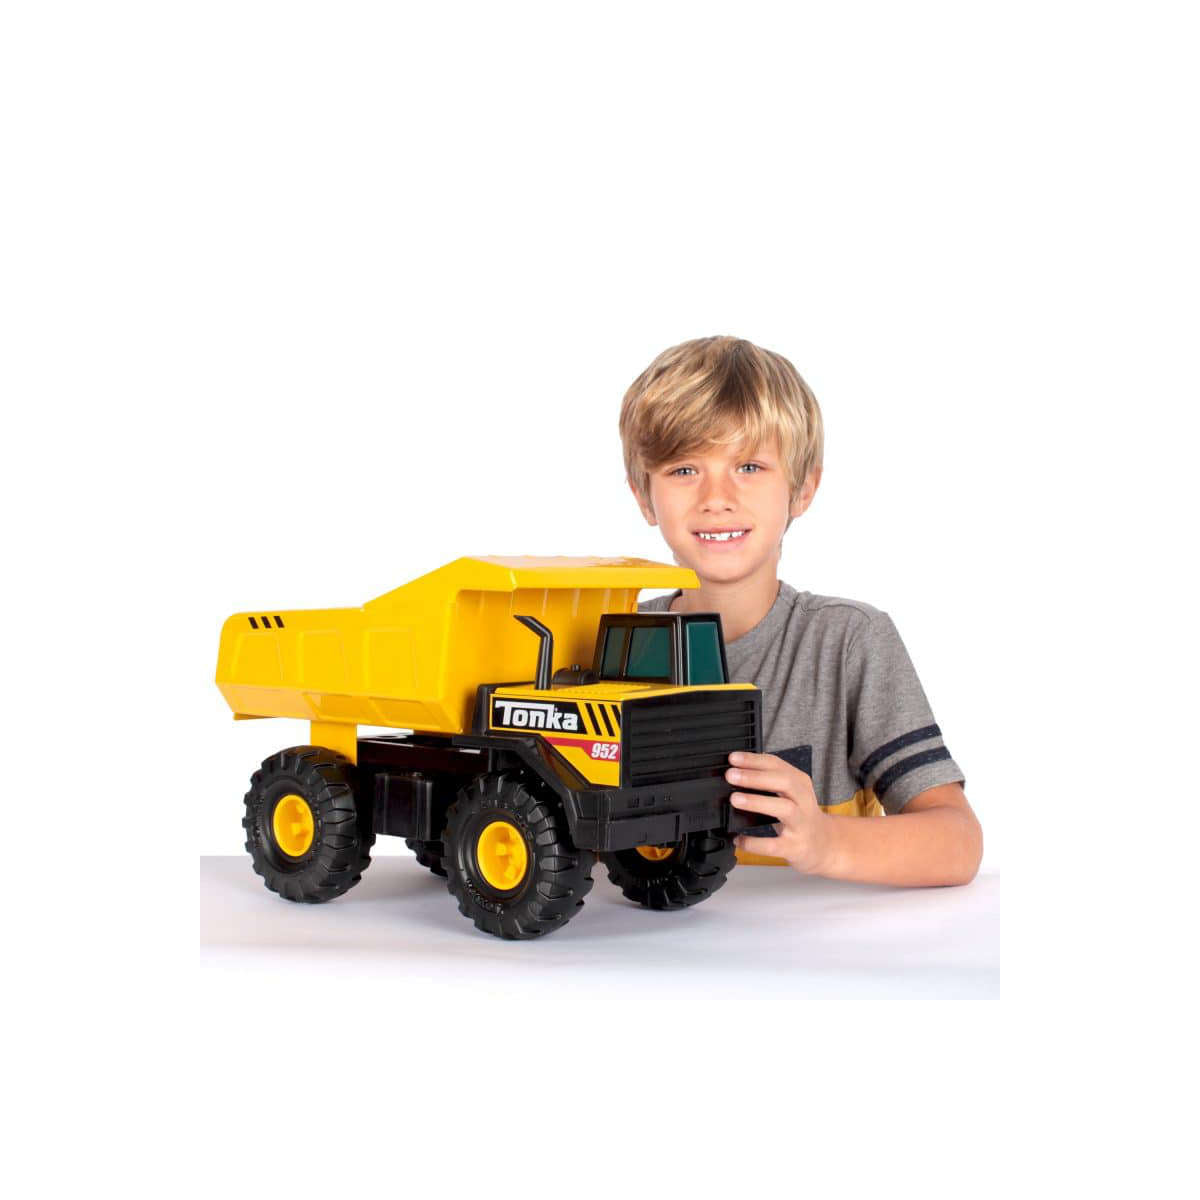 Tonka Mighty Dump Truck from Schylling